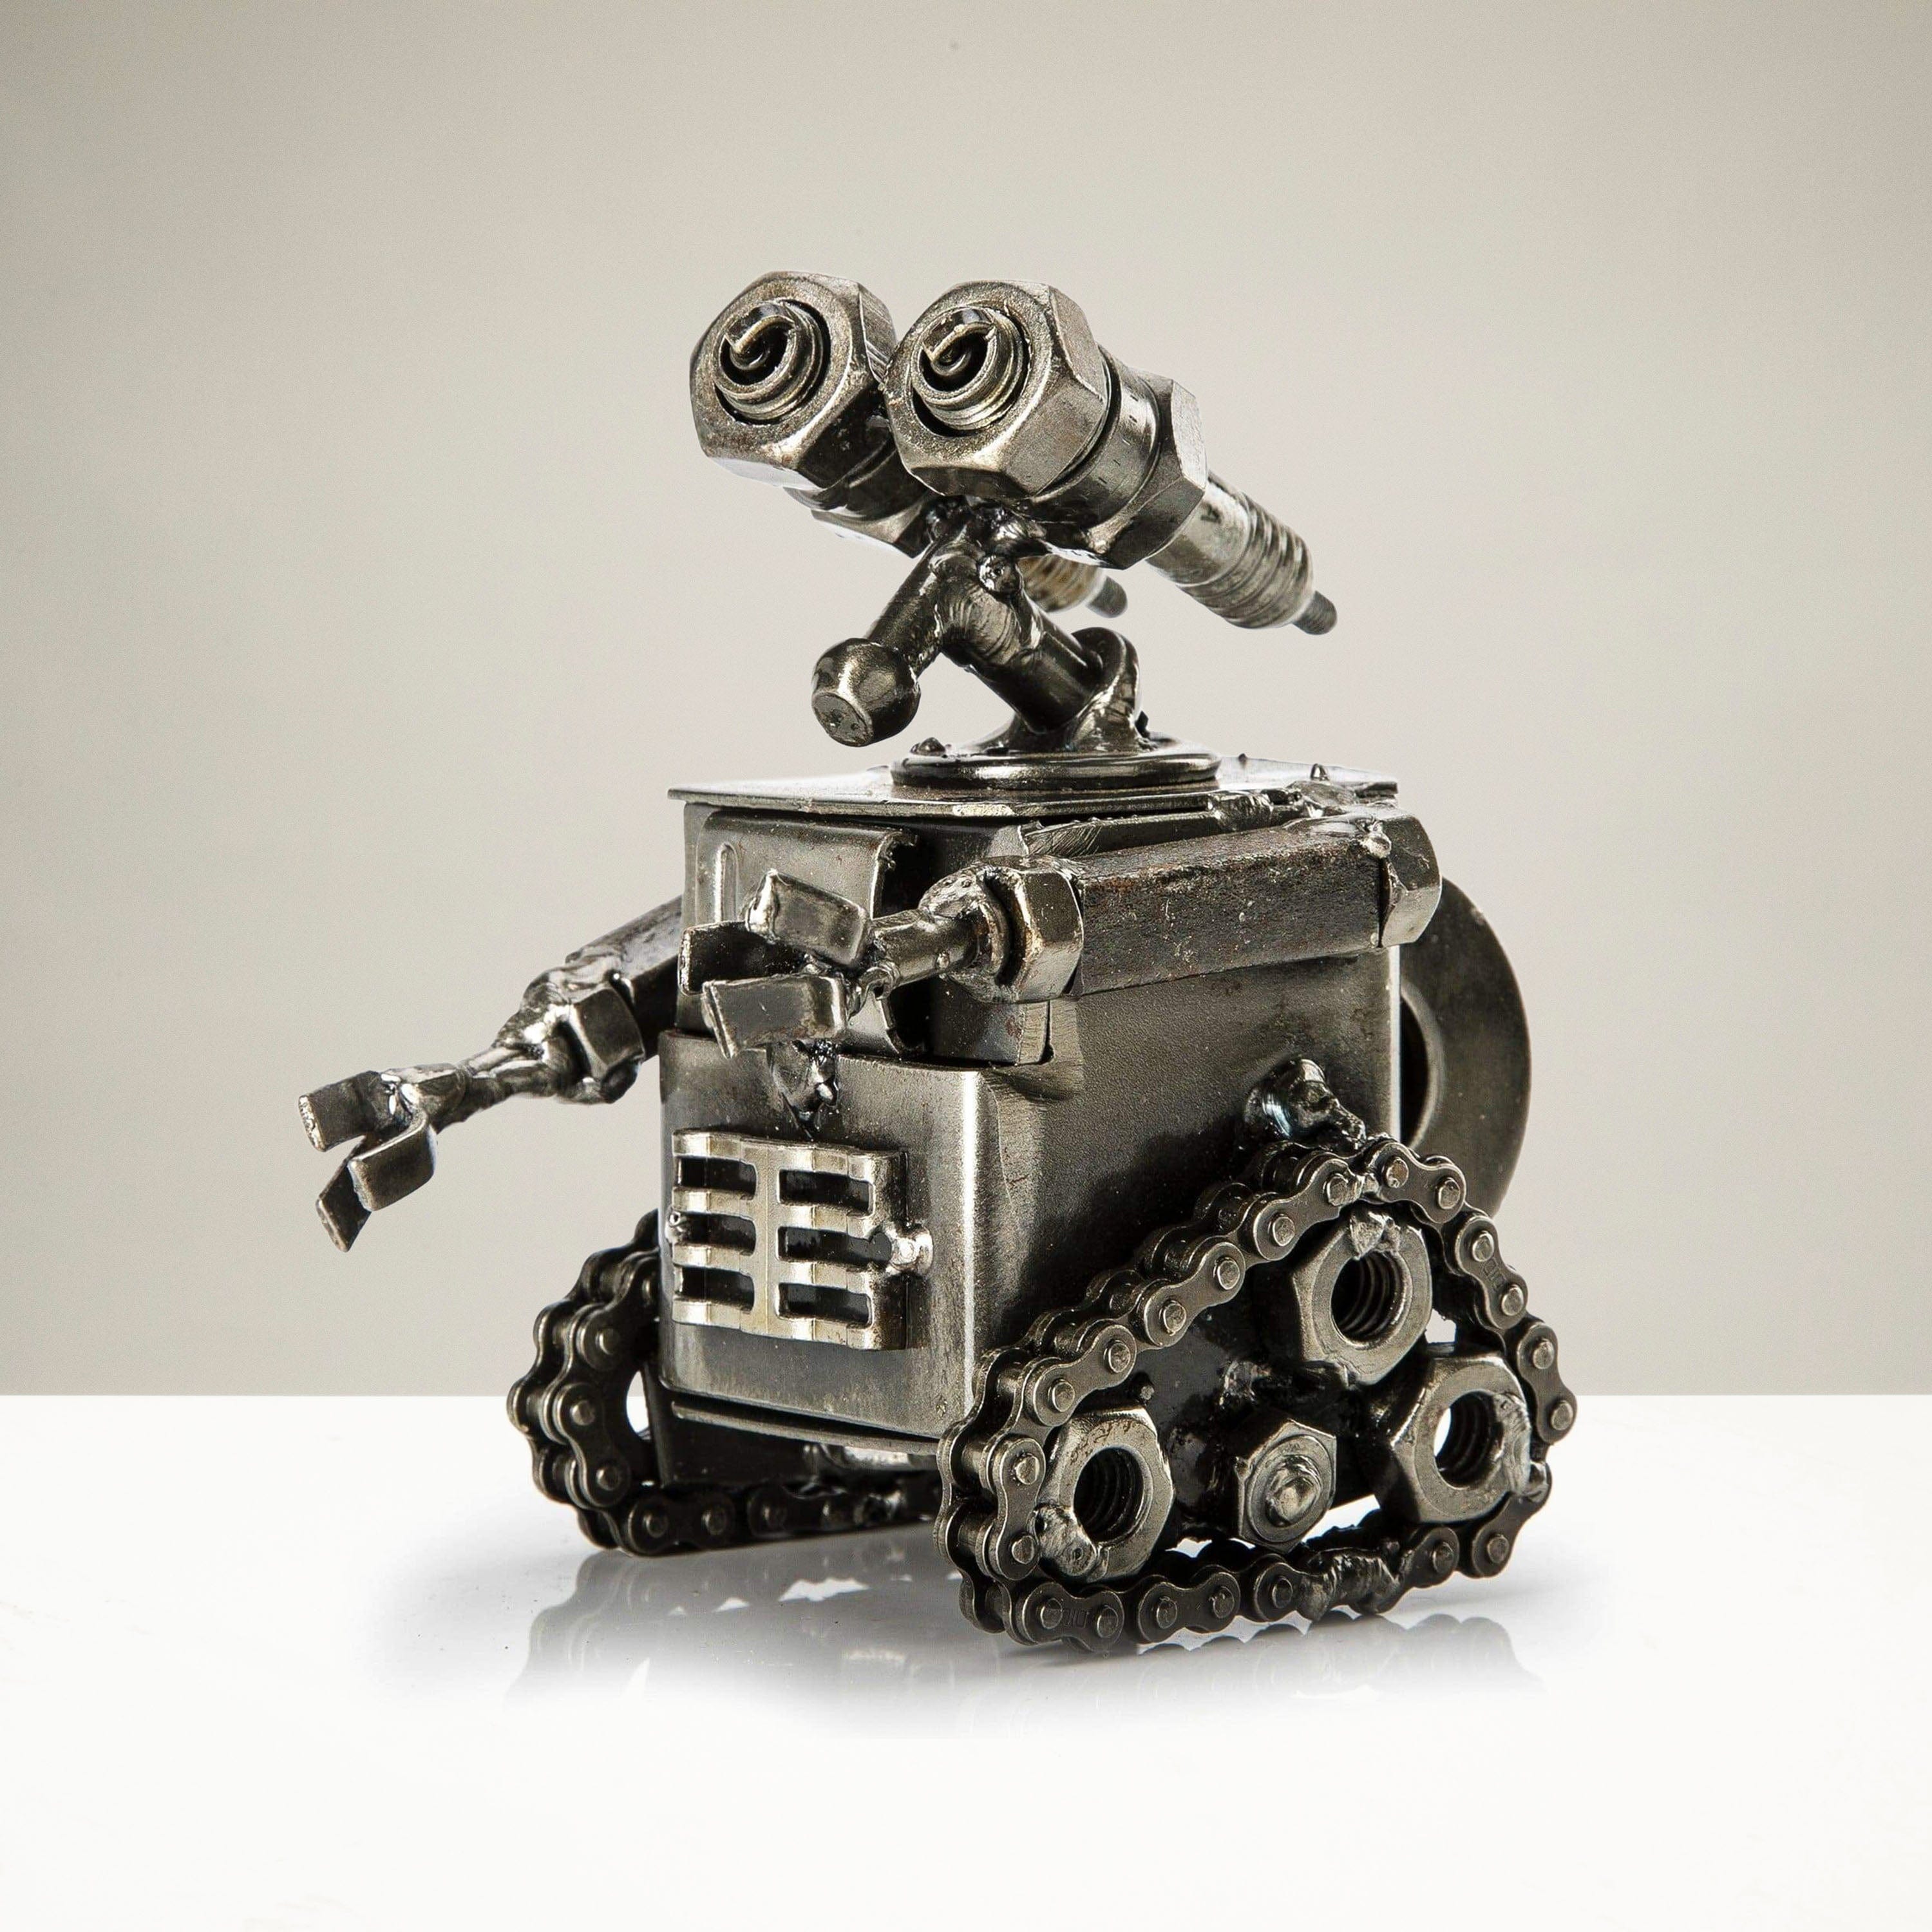 Kalifano Recycled Metal Art 4" Wall-E Inspired Recycled Metal Sculpture RMS-250WE-N